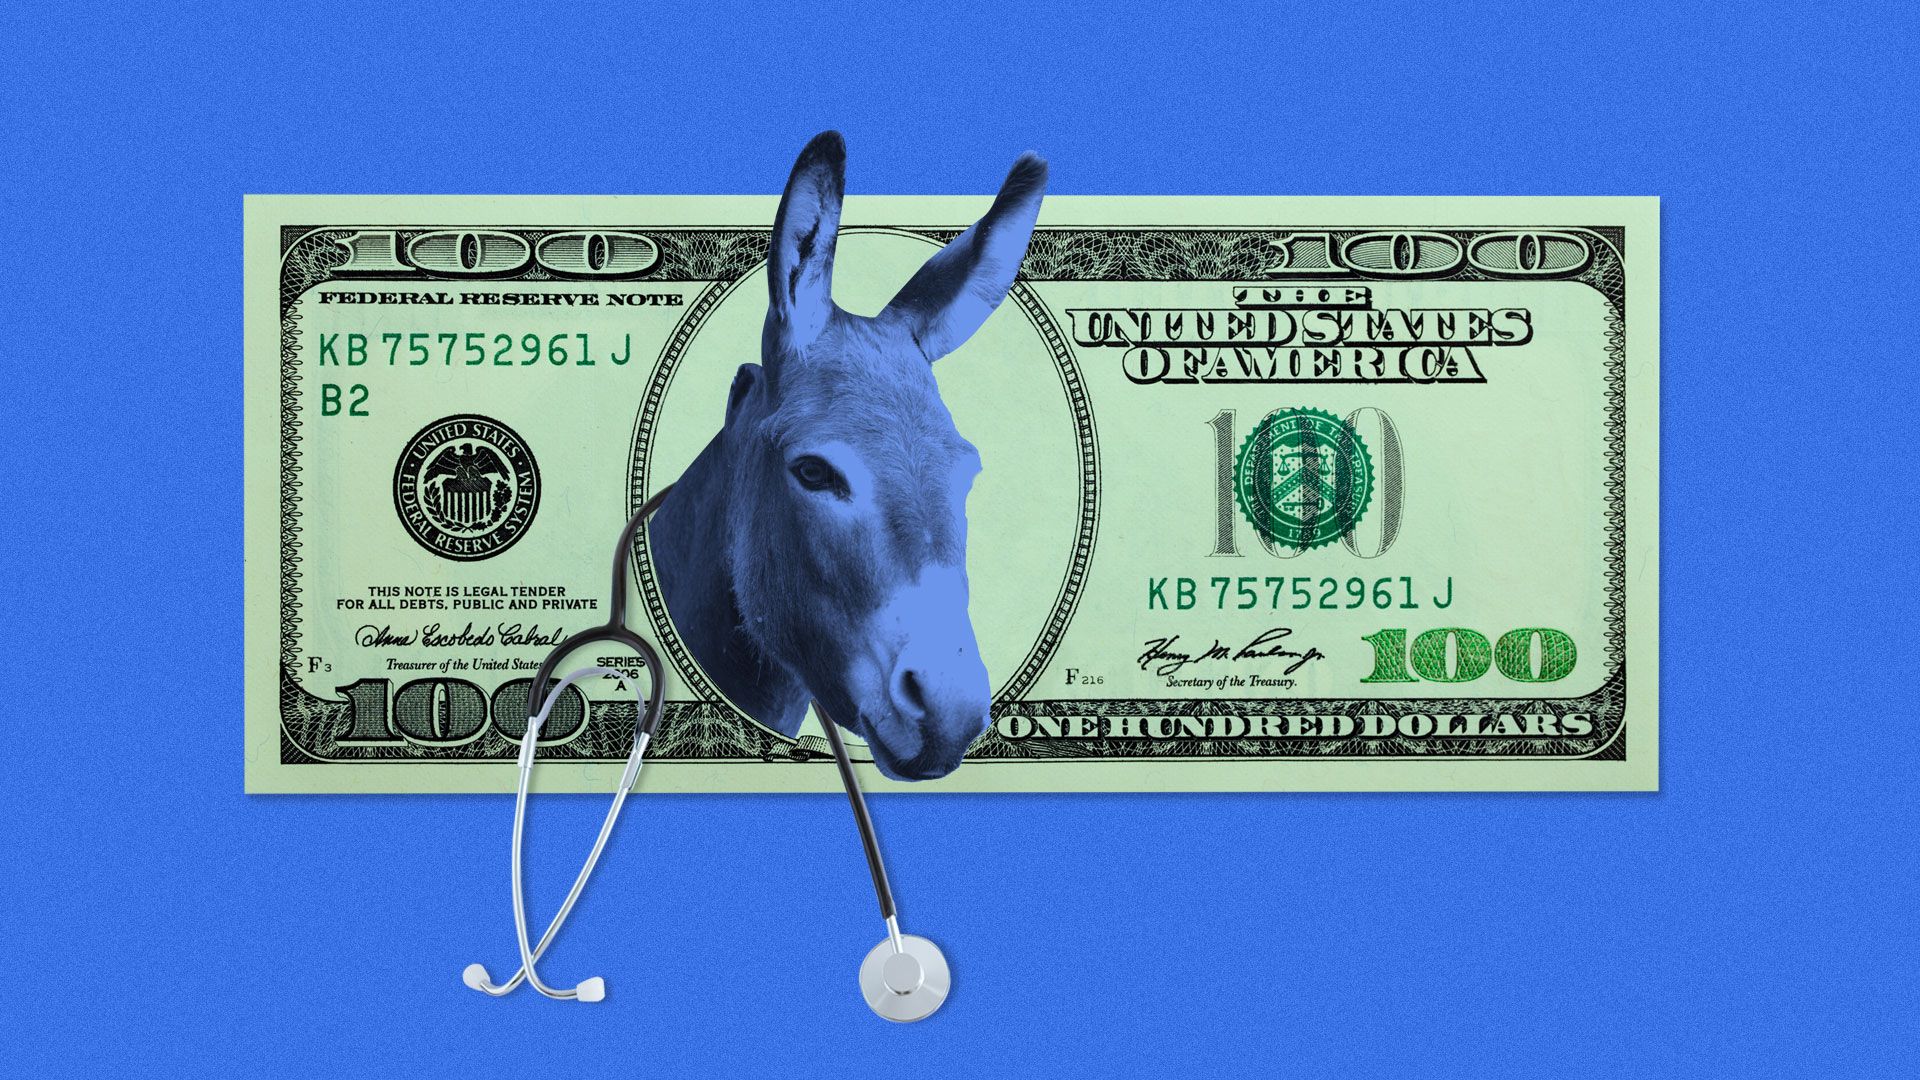 Illustration of a donkey with a stethoscope on a $100 dollar bill